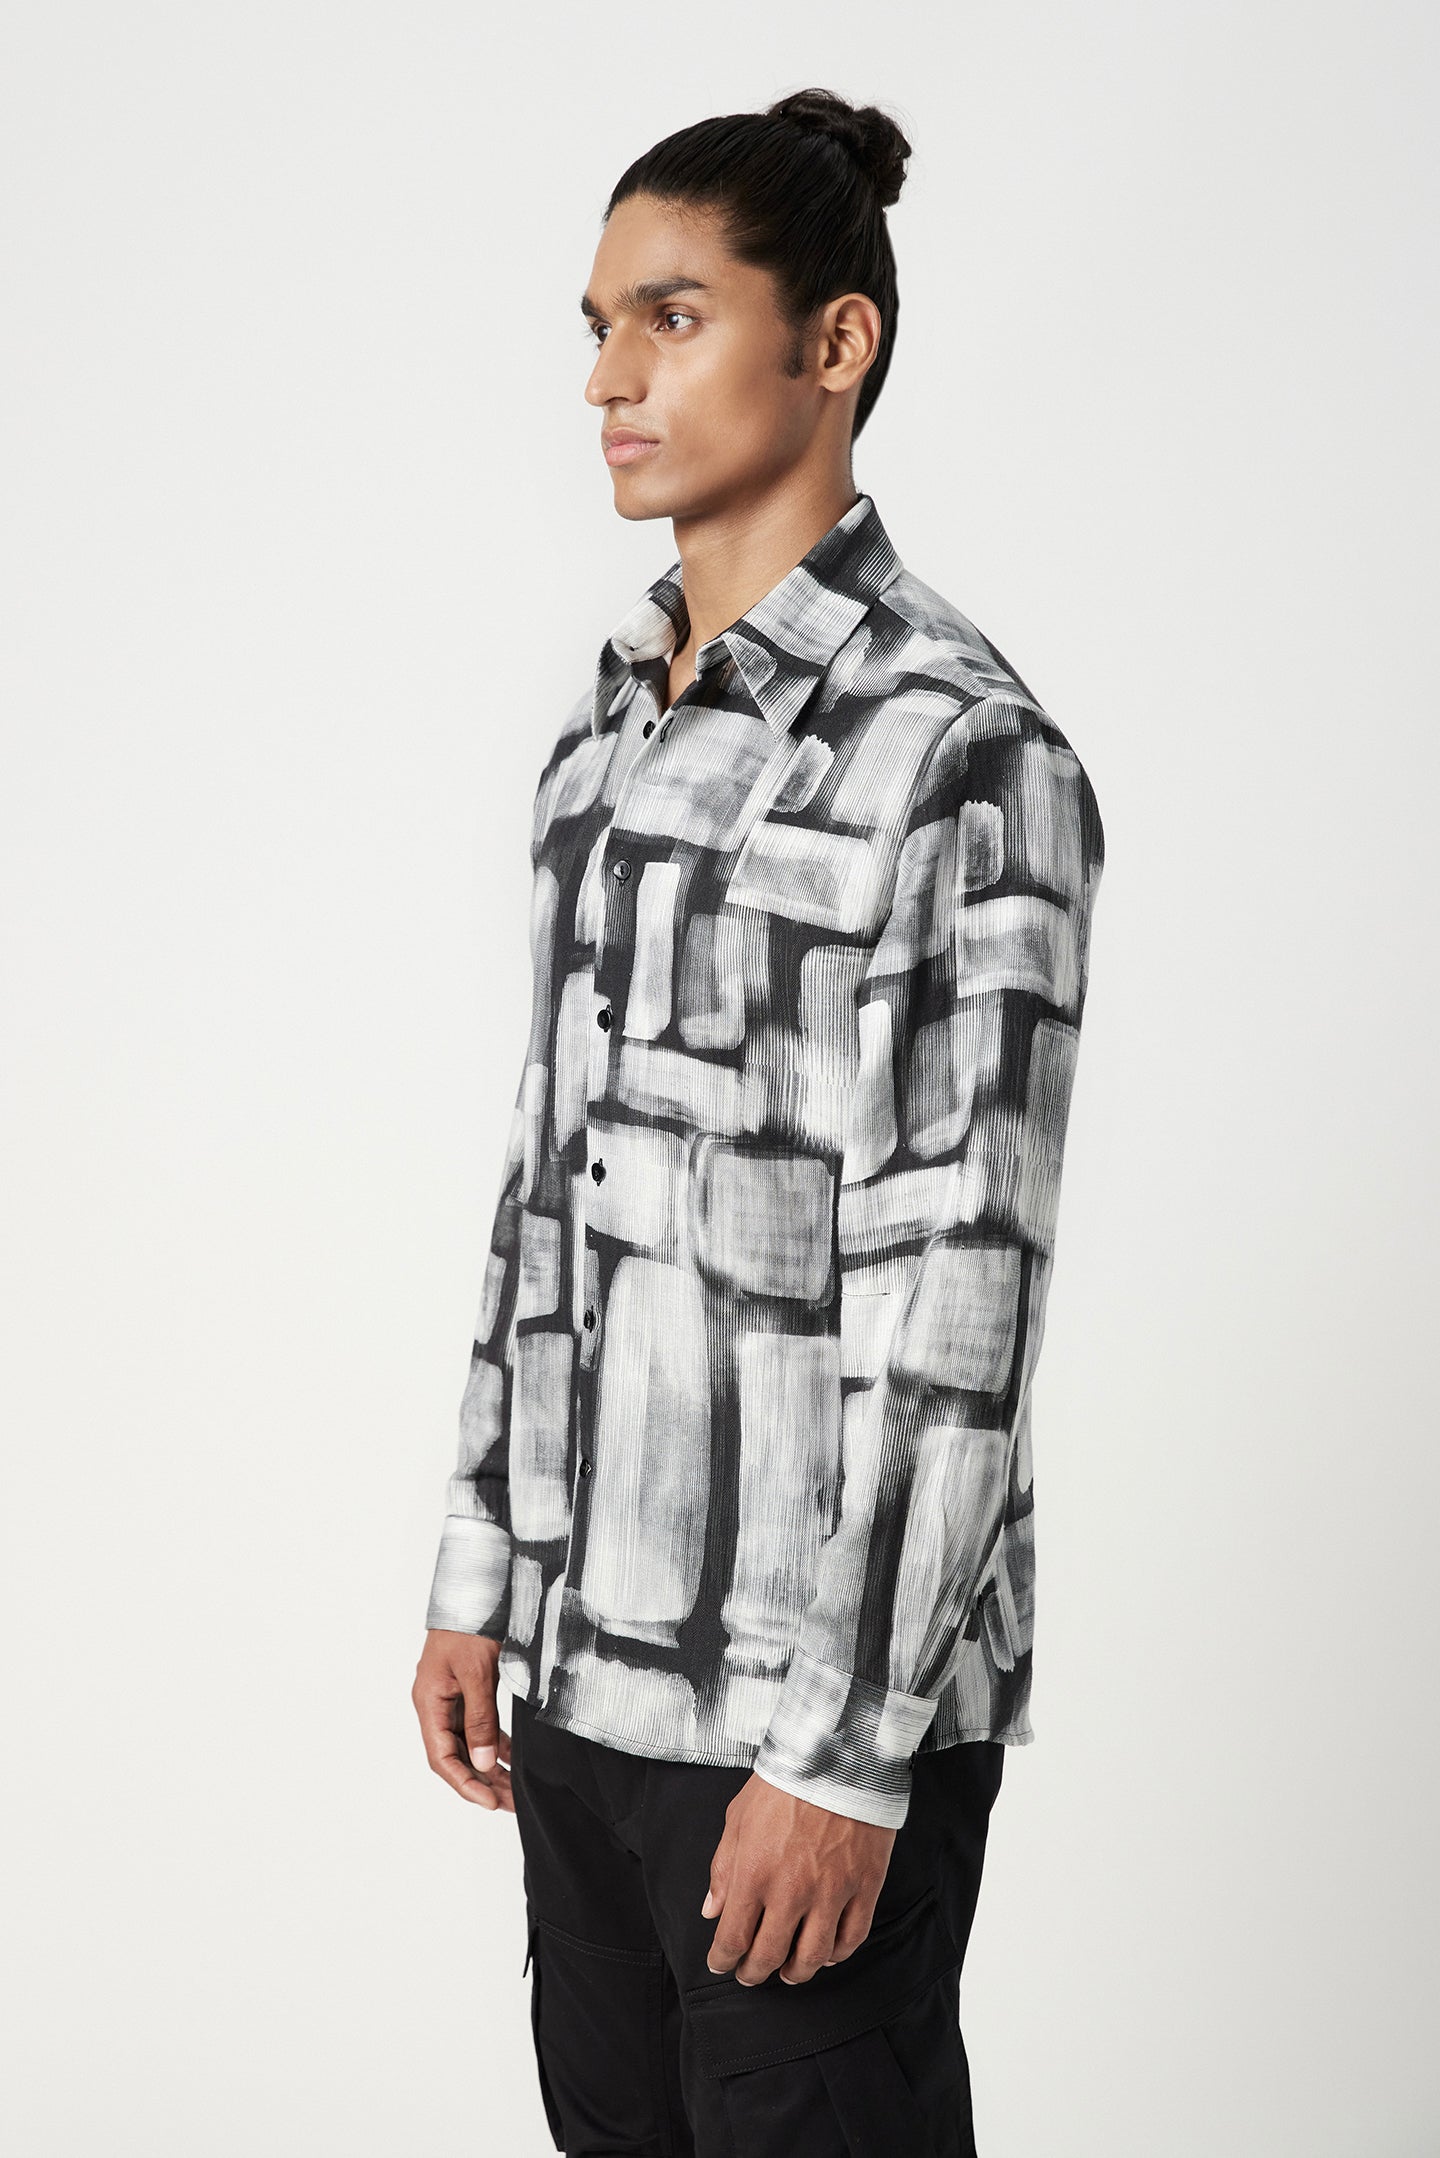 Easy Fit Button-Down Shirt in an All-Over Abstract Check Print